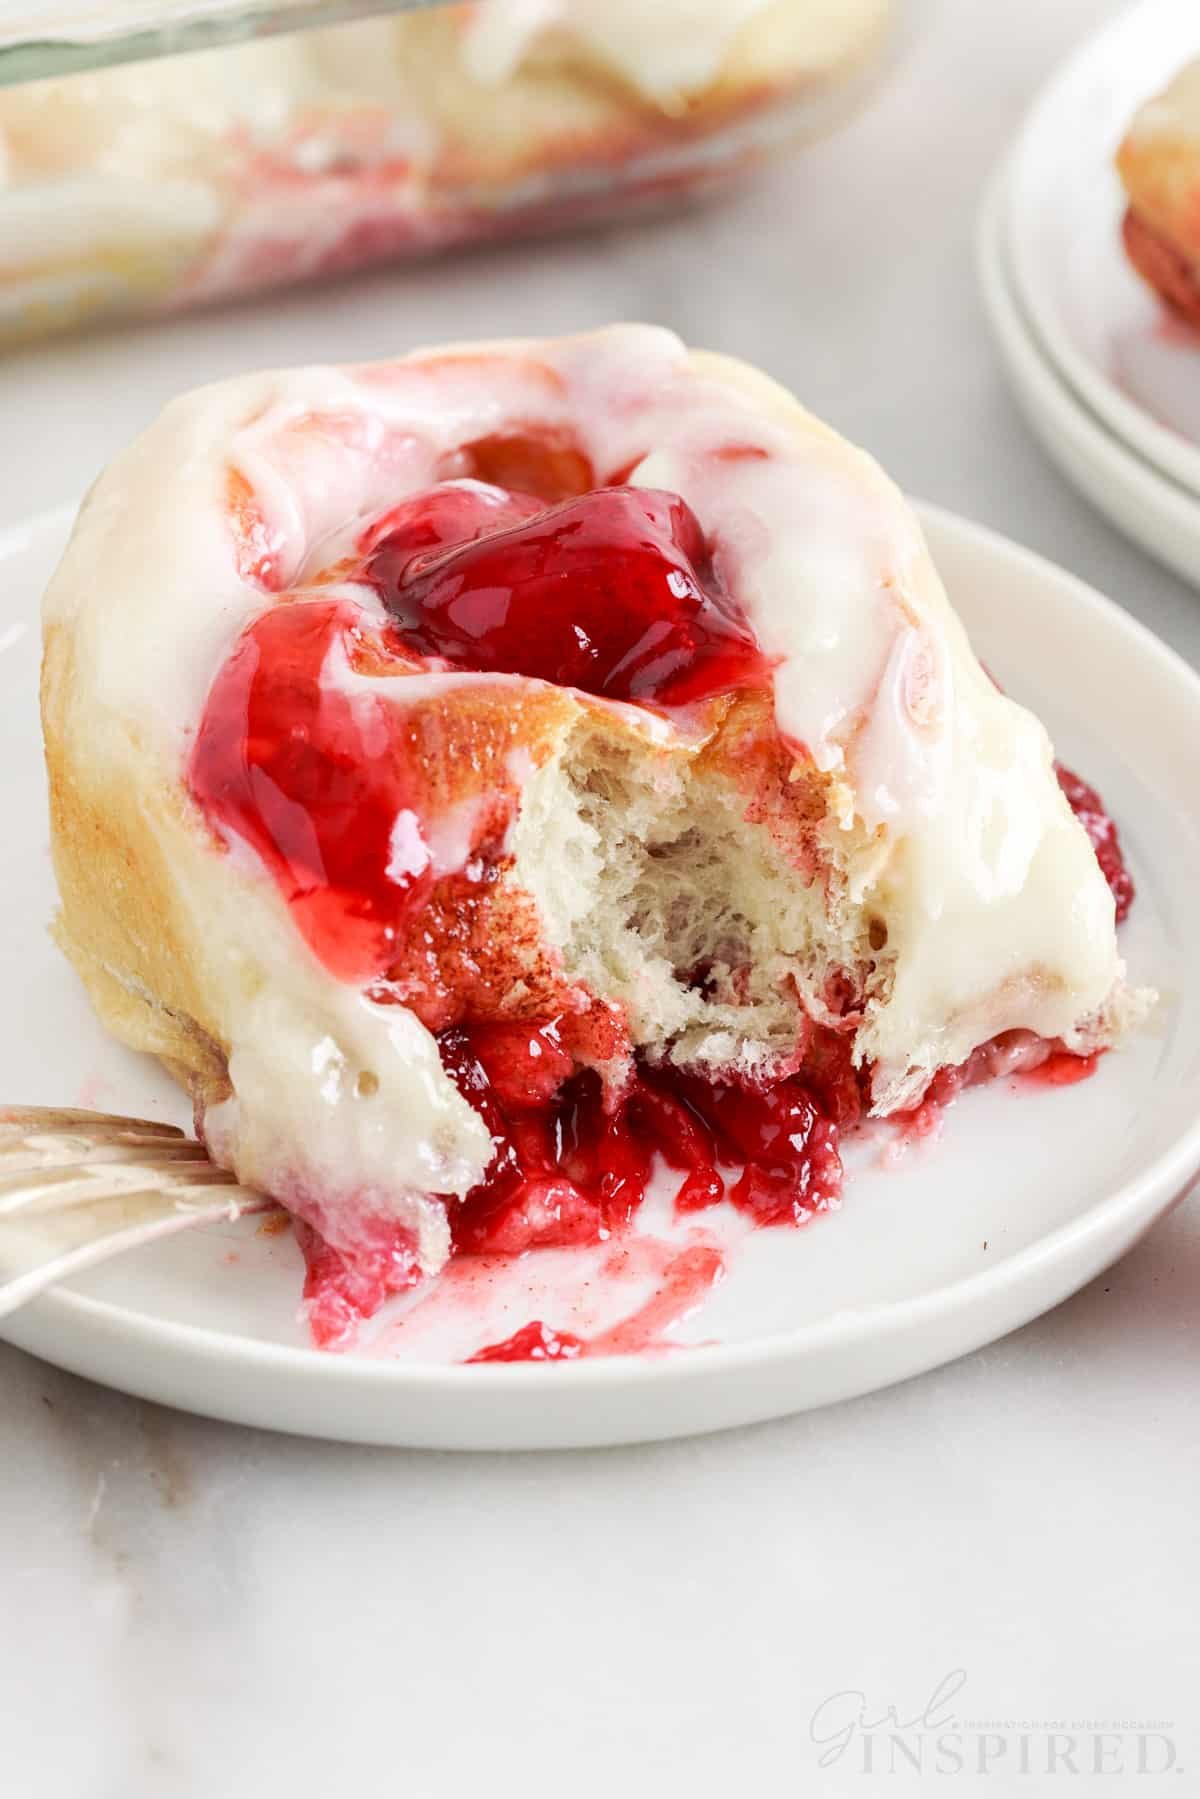 Strawberry cinnamon roll on a plate with a bite taken out.